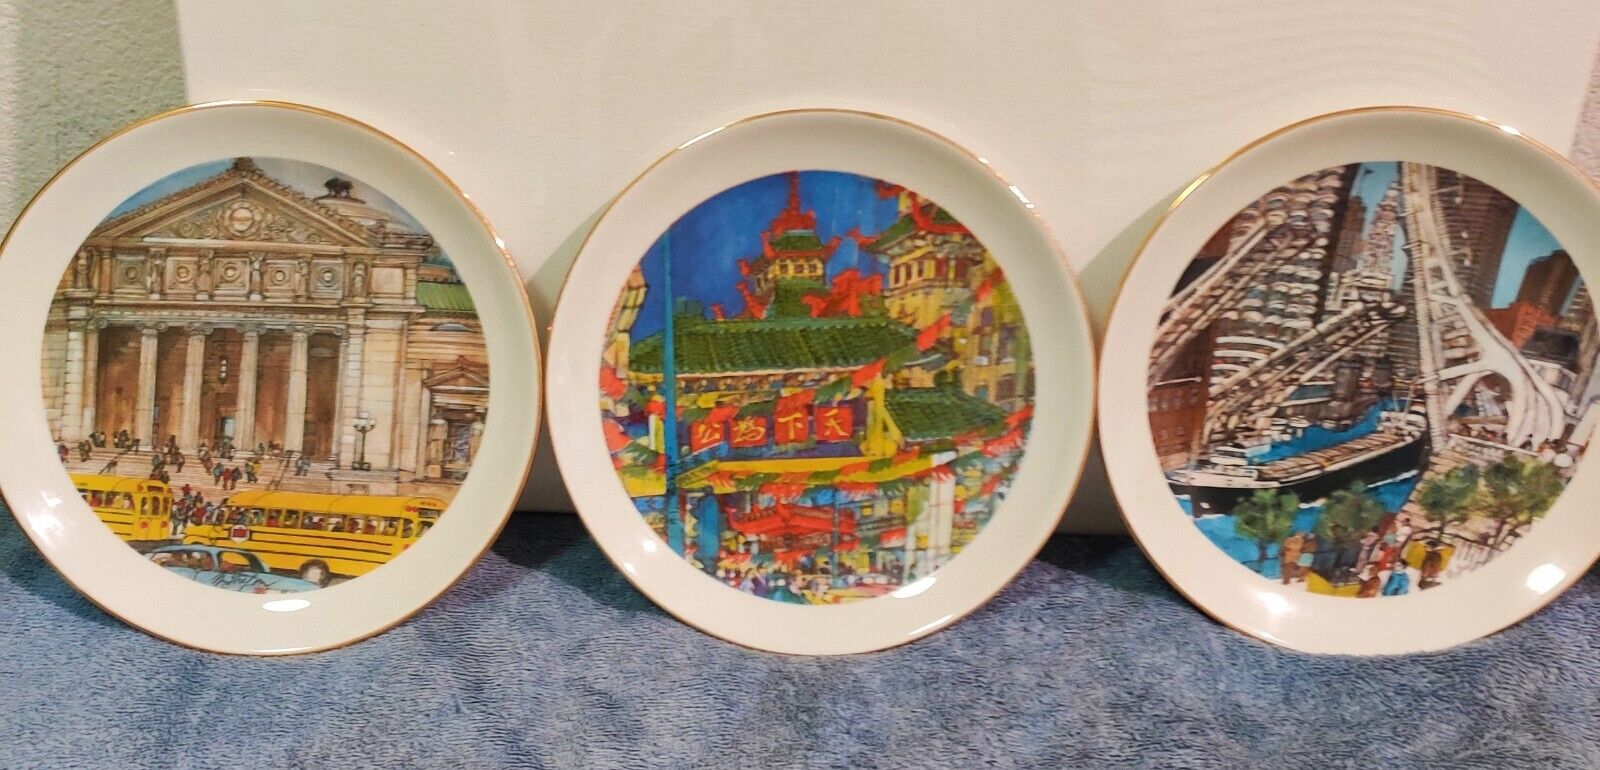 VTG Franklin McMahon 1979 PLATES Lot Chicago Collection Traffic Museum Chinatown